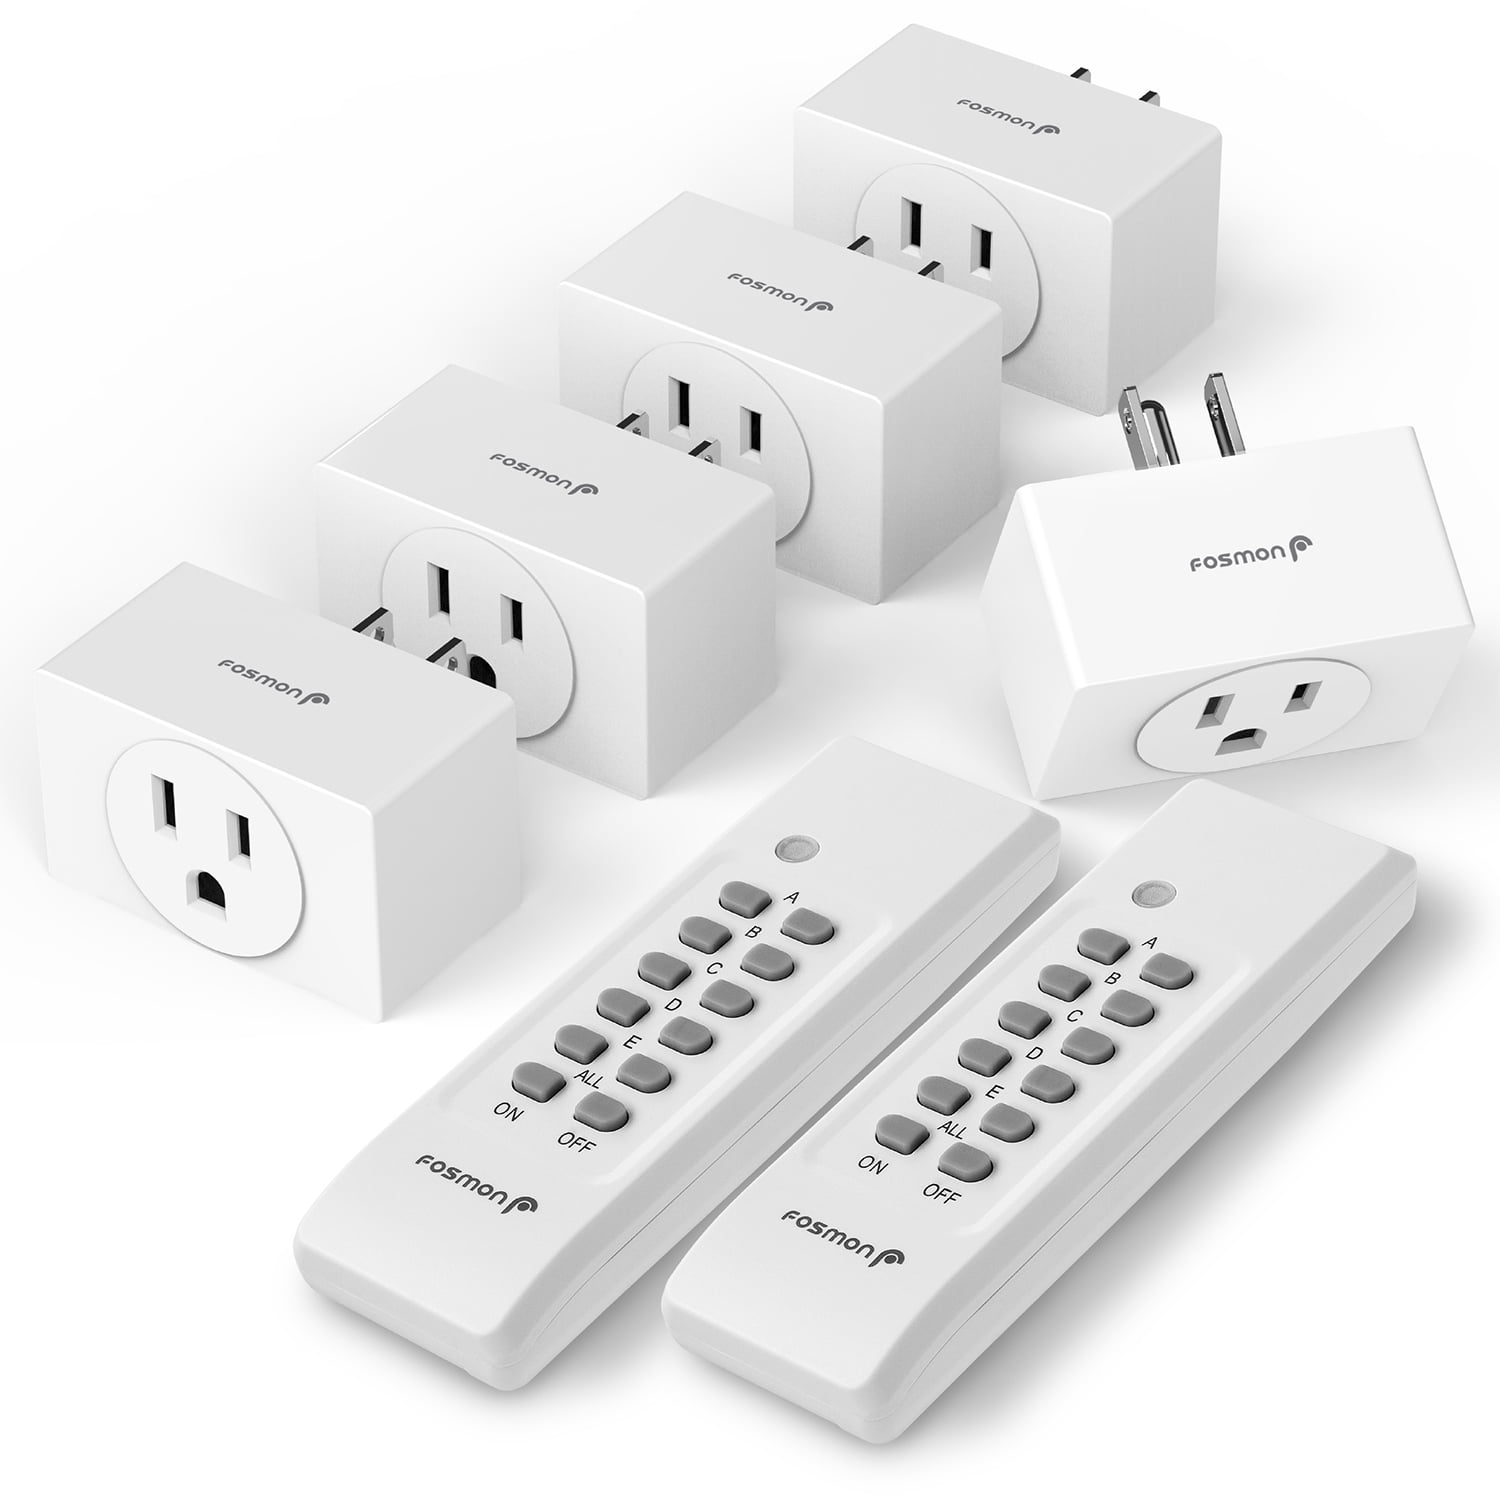 WavePoint Wireless Outlet Plug with 3-Button- white